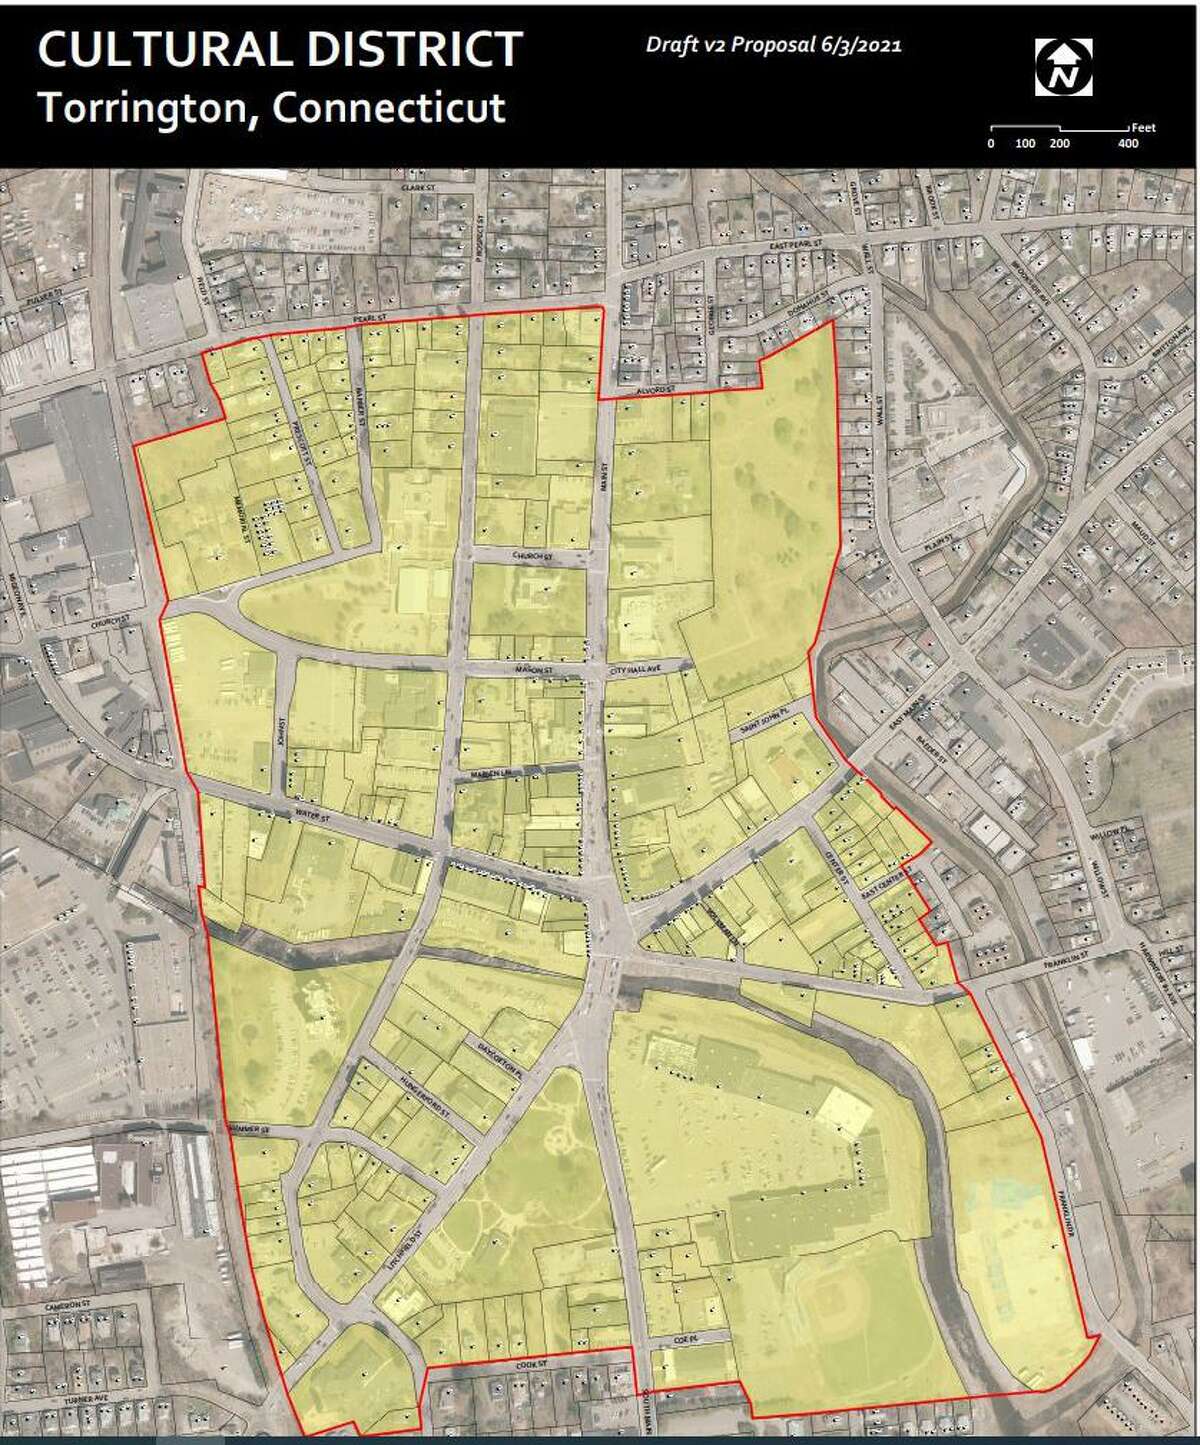 Torrington is applying to the state to establish a cultural district downtown. Pictured is a screenshot of the proposed area in Torrington.